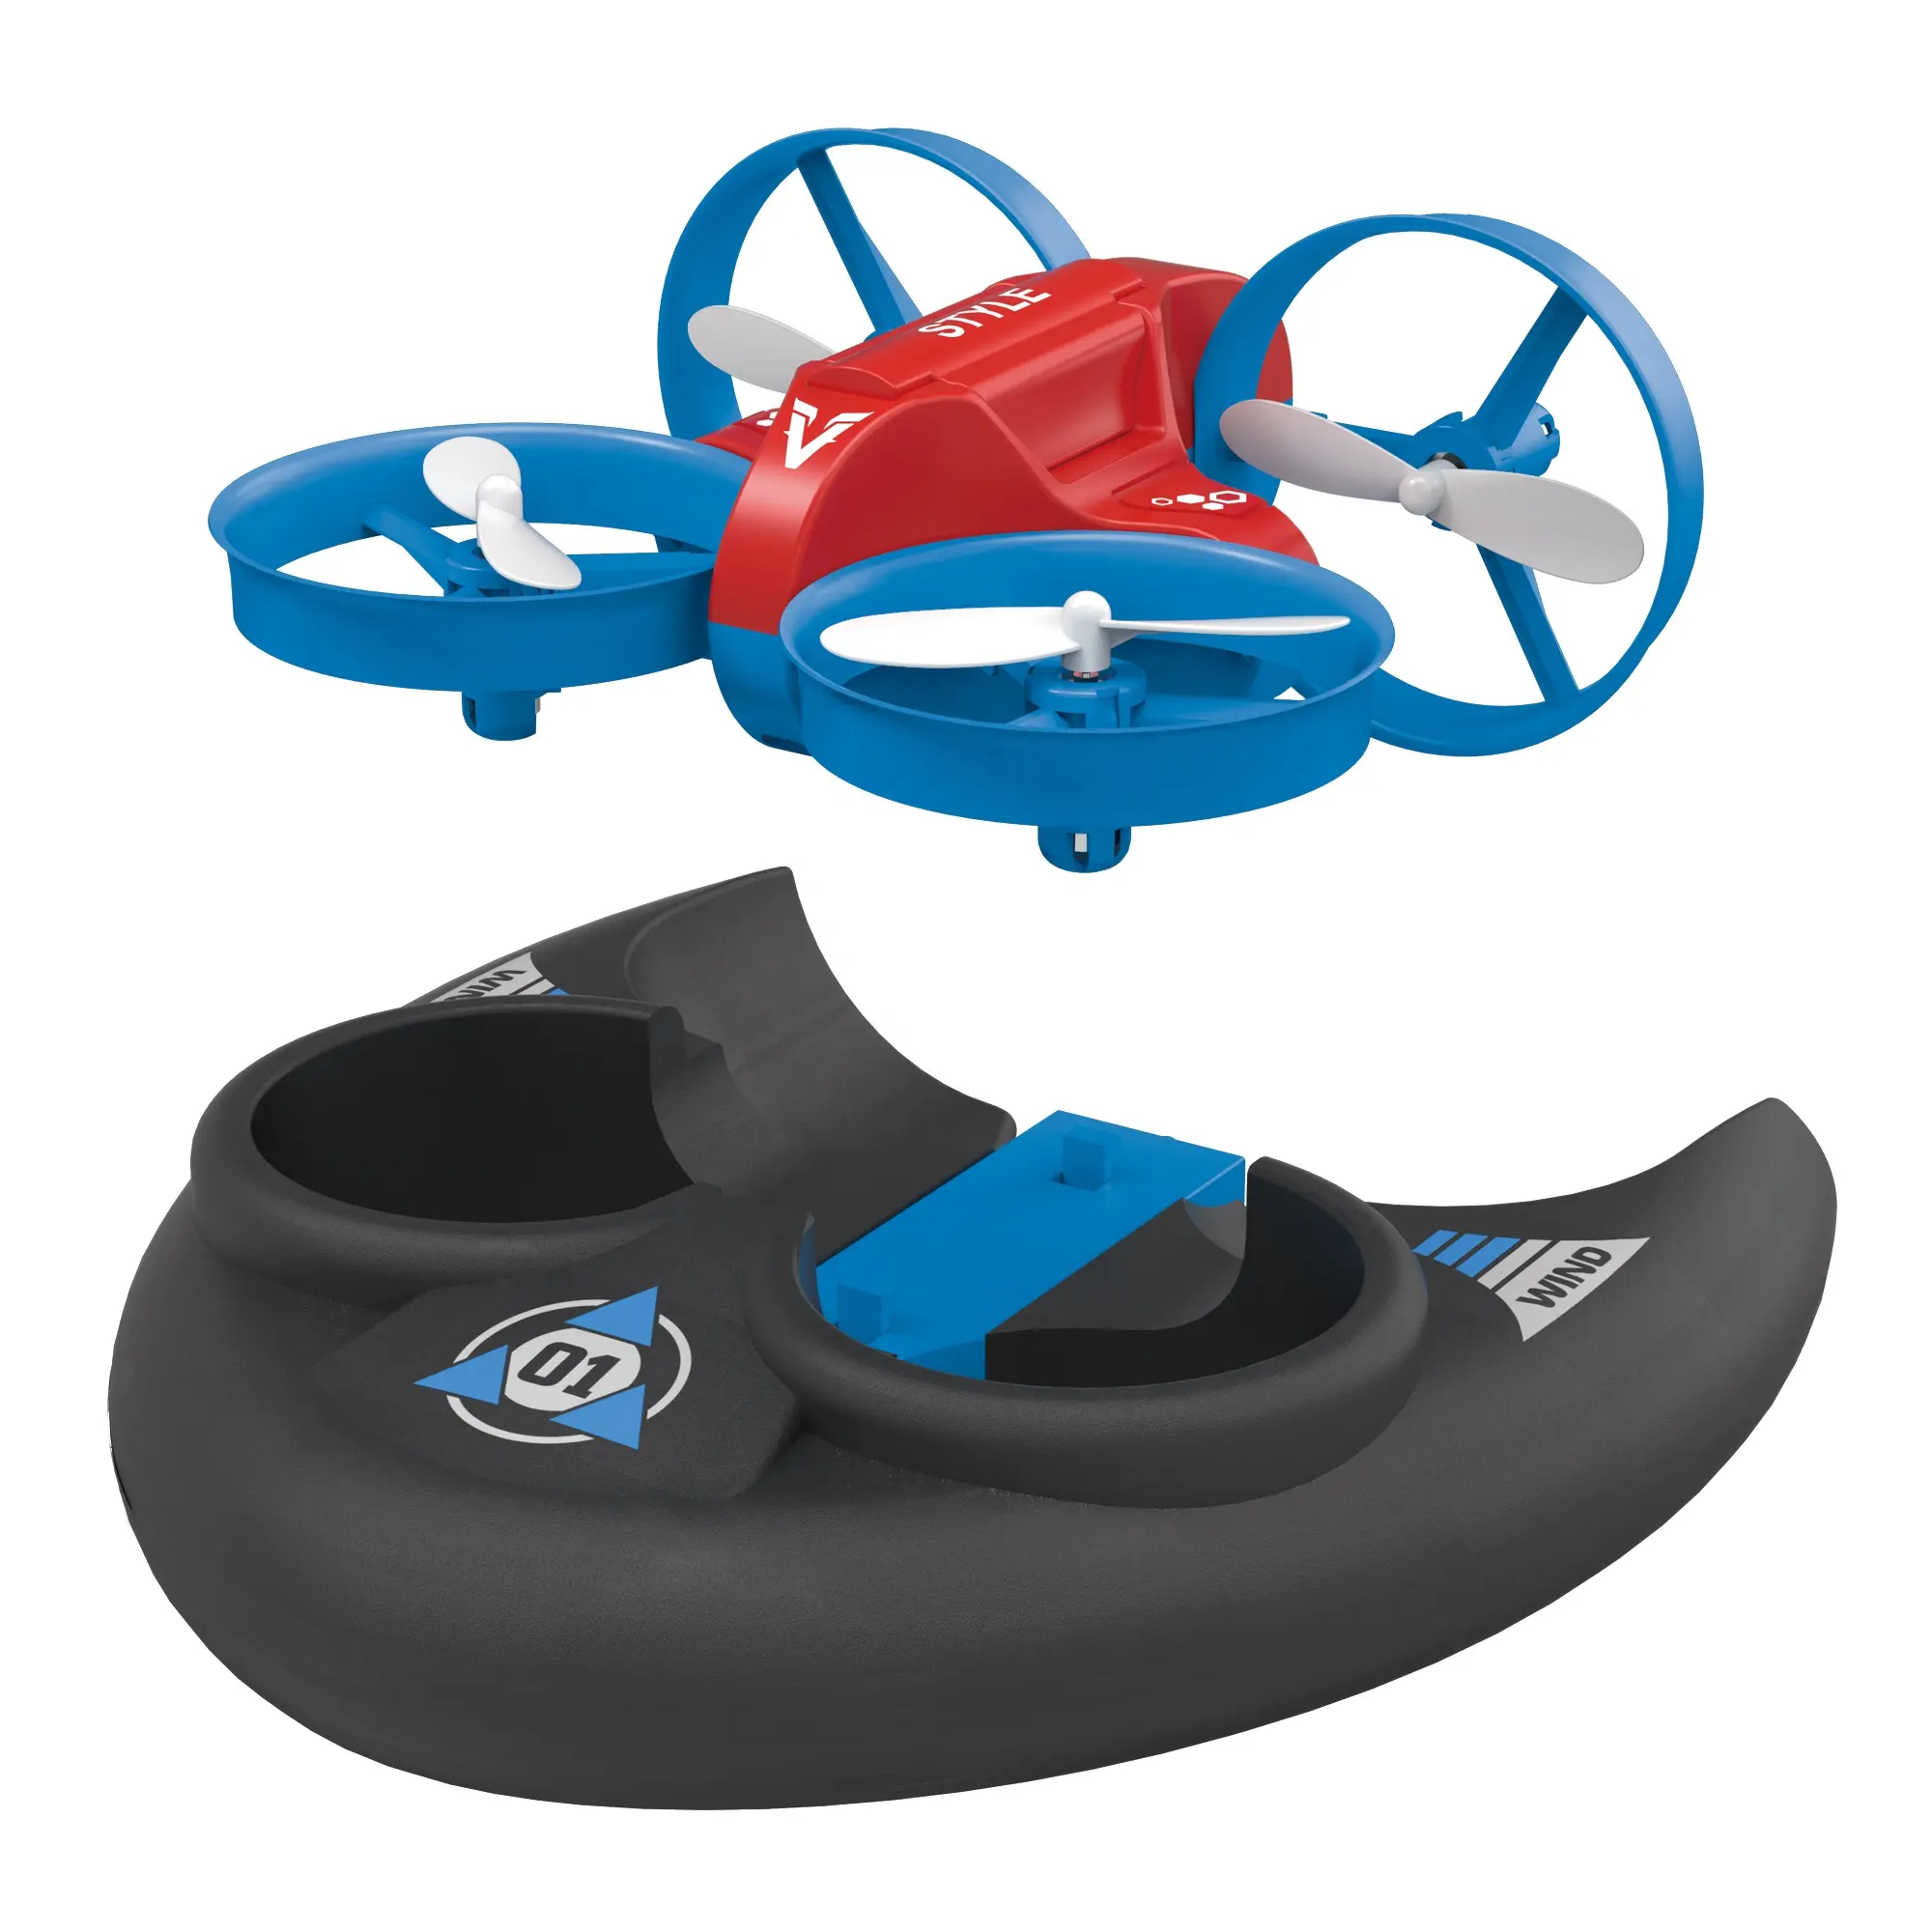 Amiqi JJRC H101 2.4G Small 3 In 1 4-Axis Drone Radio Control Hovercraft Toy Boat Aircraft Ufo Mini Waterproof Dron Car Kid